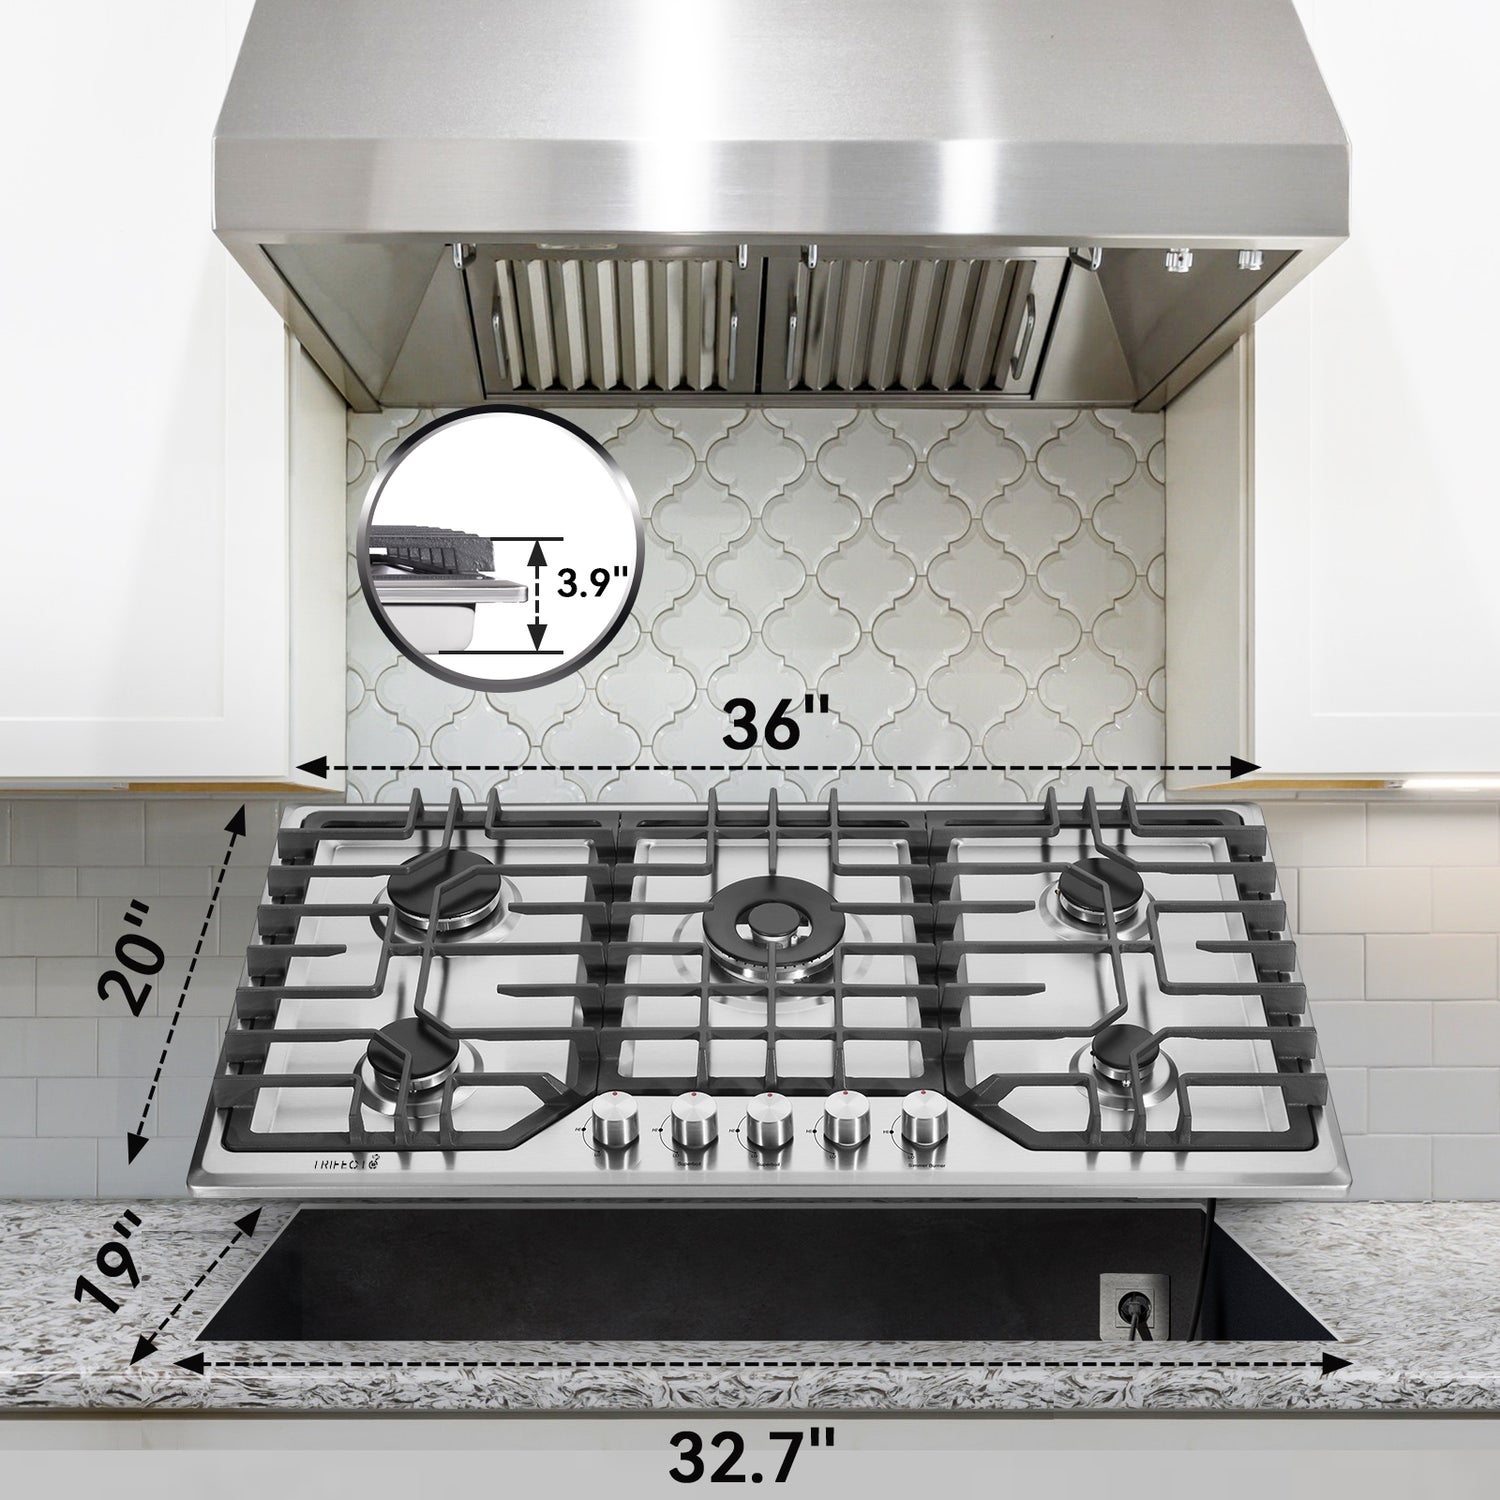 Cooking Stove Appliances Table Top 4 Burners Other Gas Cooktops With Cast  Iron Grate - Buy Cooking Stove Appliances Table Top 4 Burners Other Gas  Cooktops With Cast Iron Grate Product on